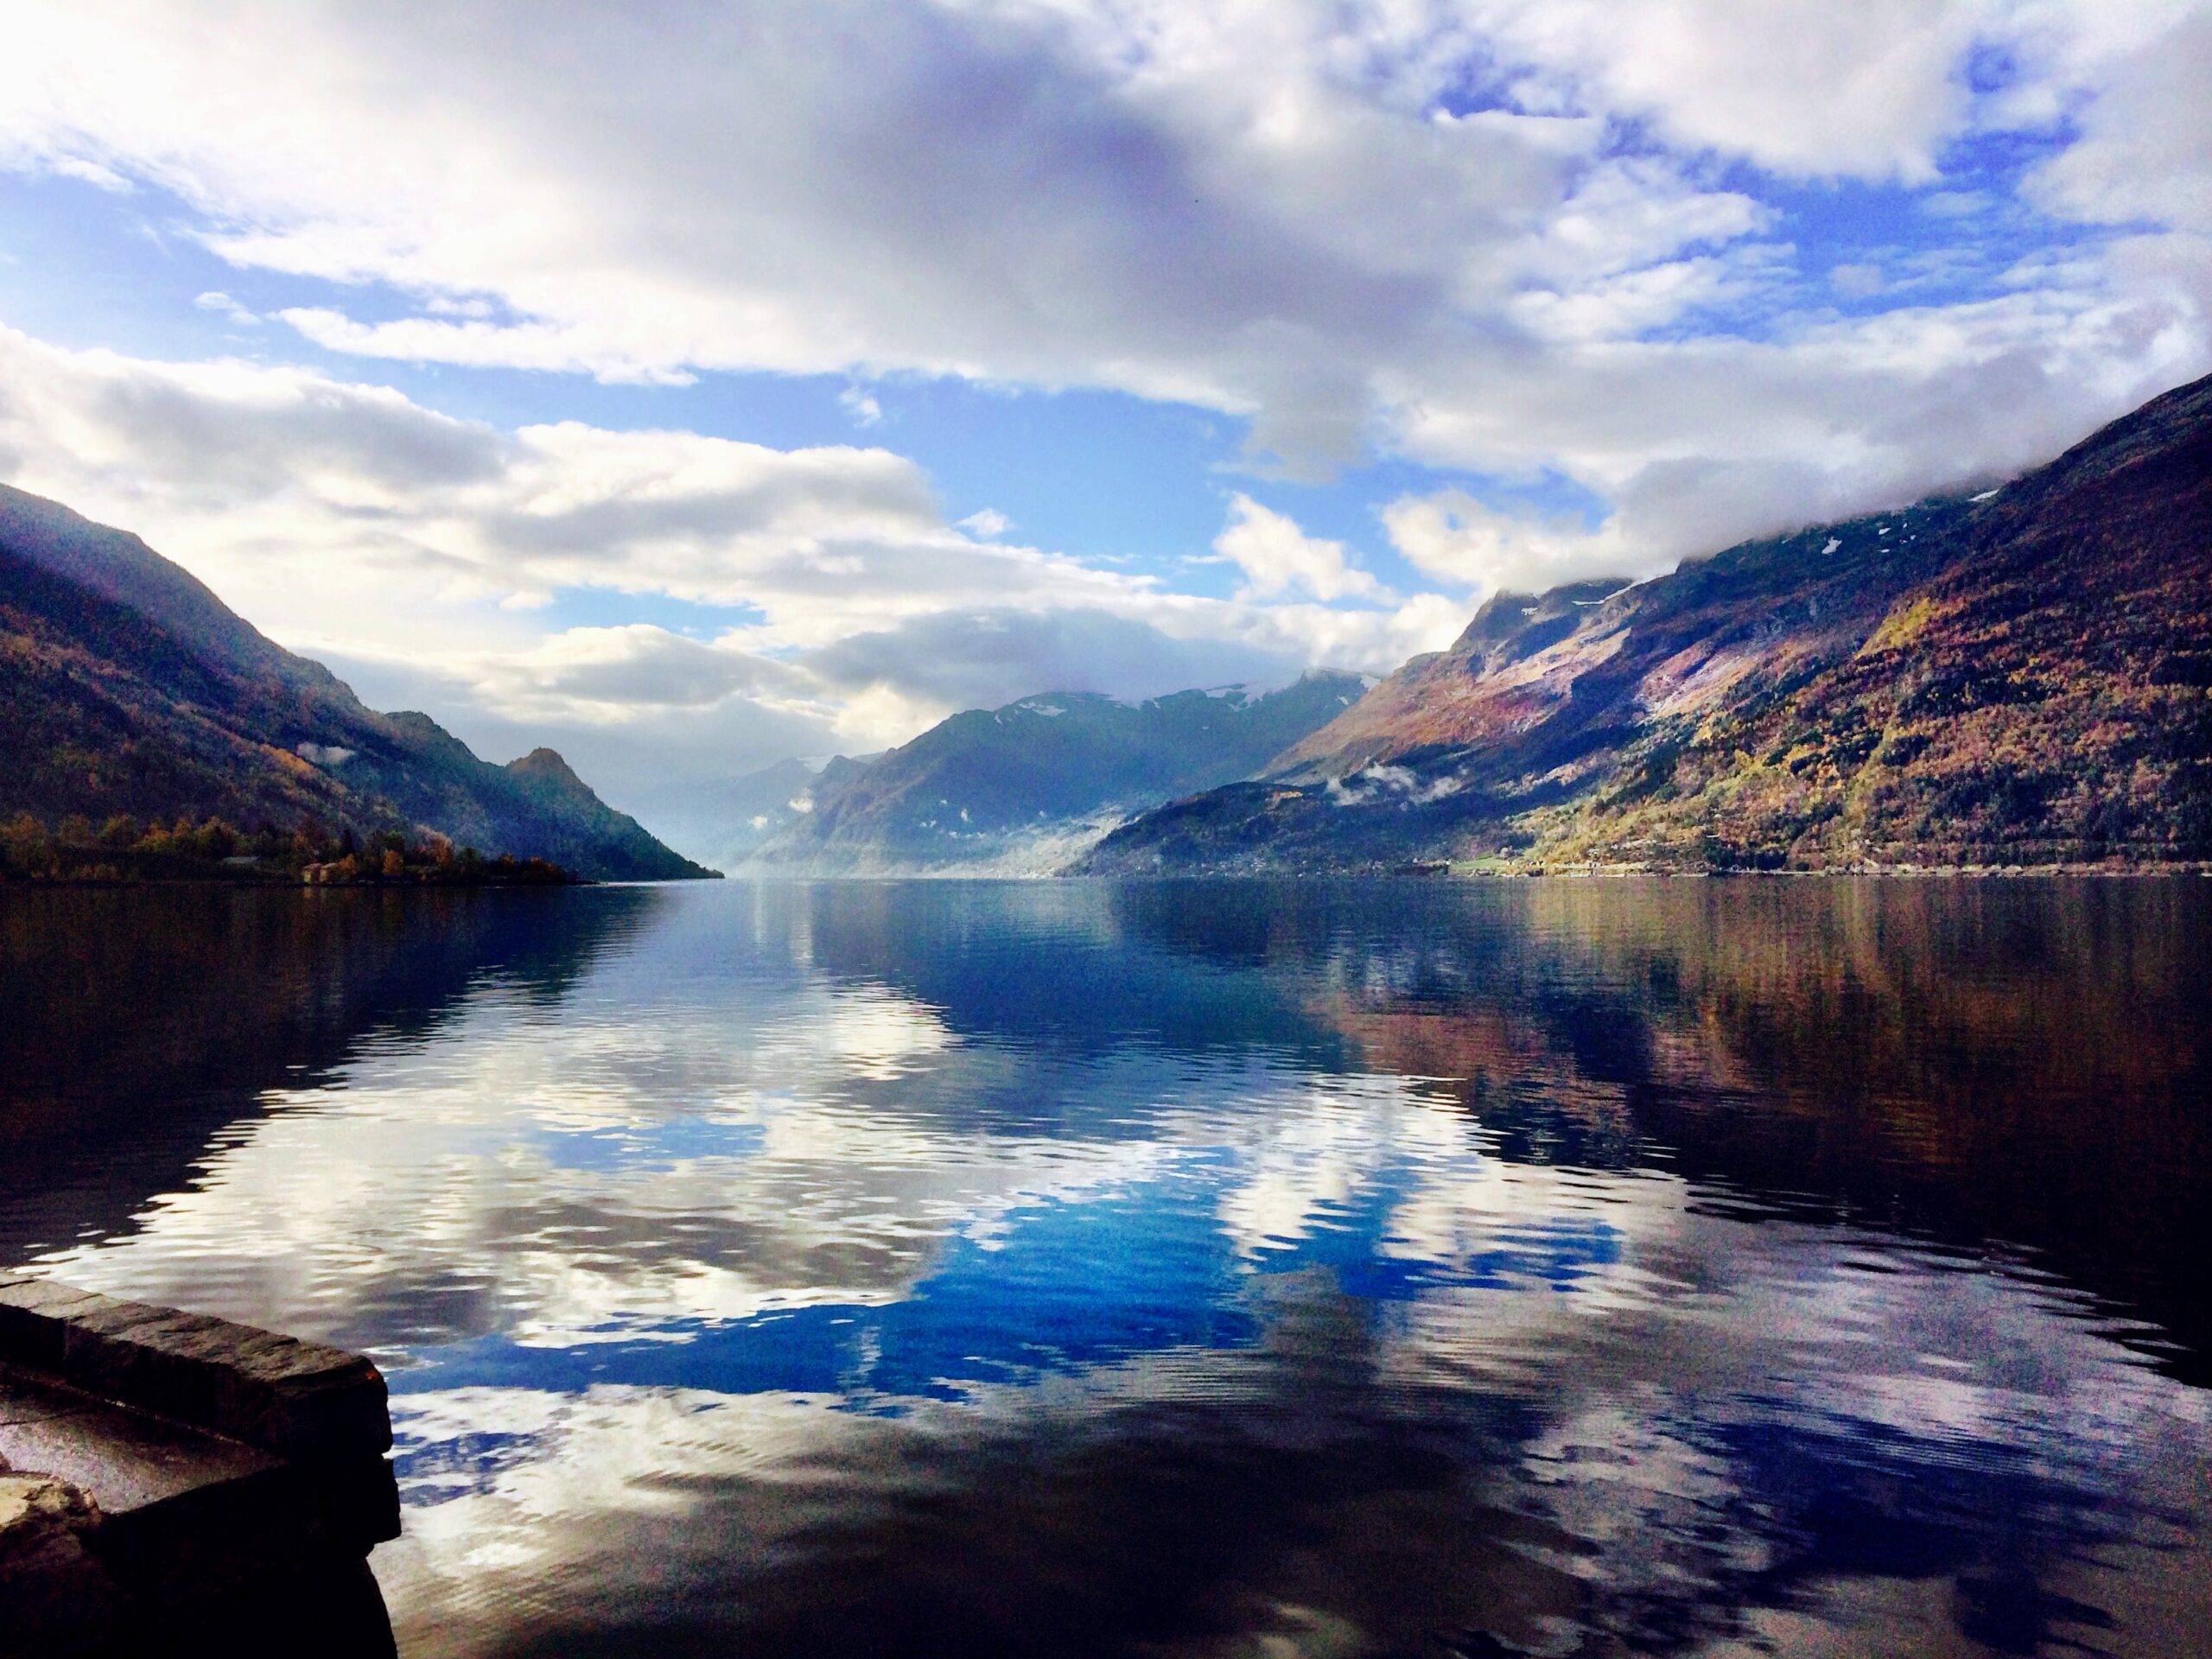 "#fall #norway #mountain #fjords #nature" by Camillaen is licensed under CC BY 2.0.